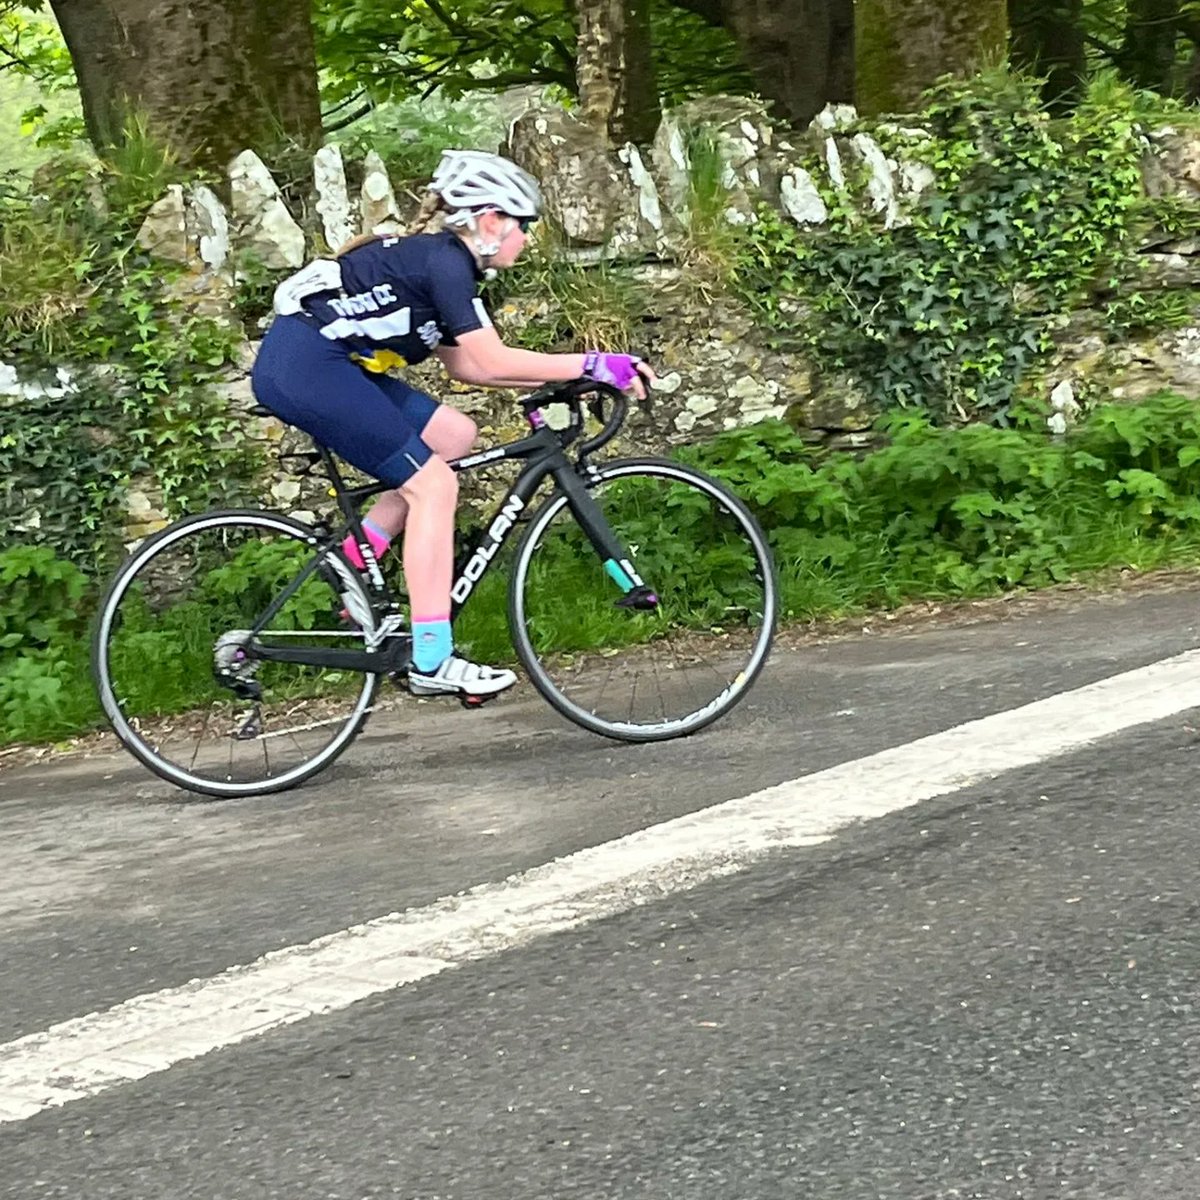 Olivia rode superbly at the Isle of Man Youth Tour, taking 7th on both stages, and 7th overall. Thanks @ololprimary for the support. @iomyt